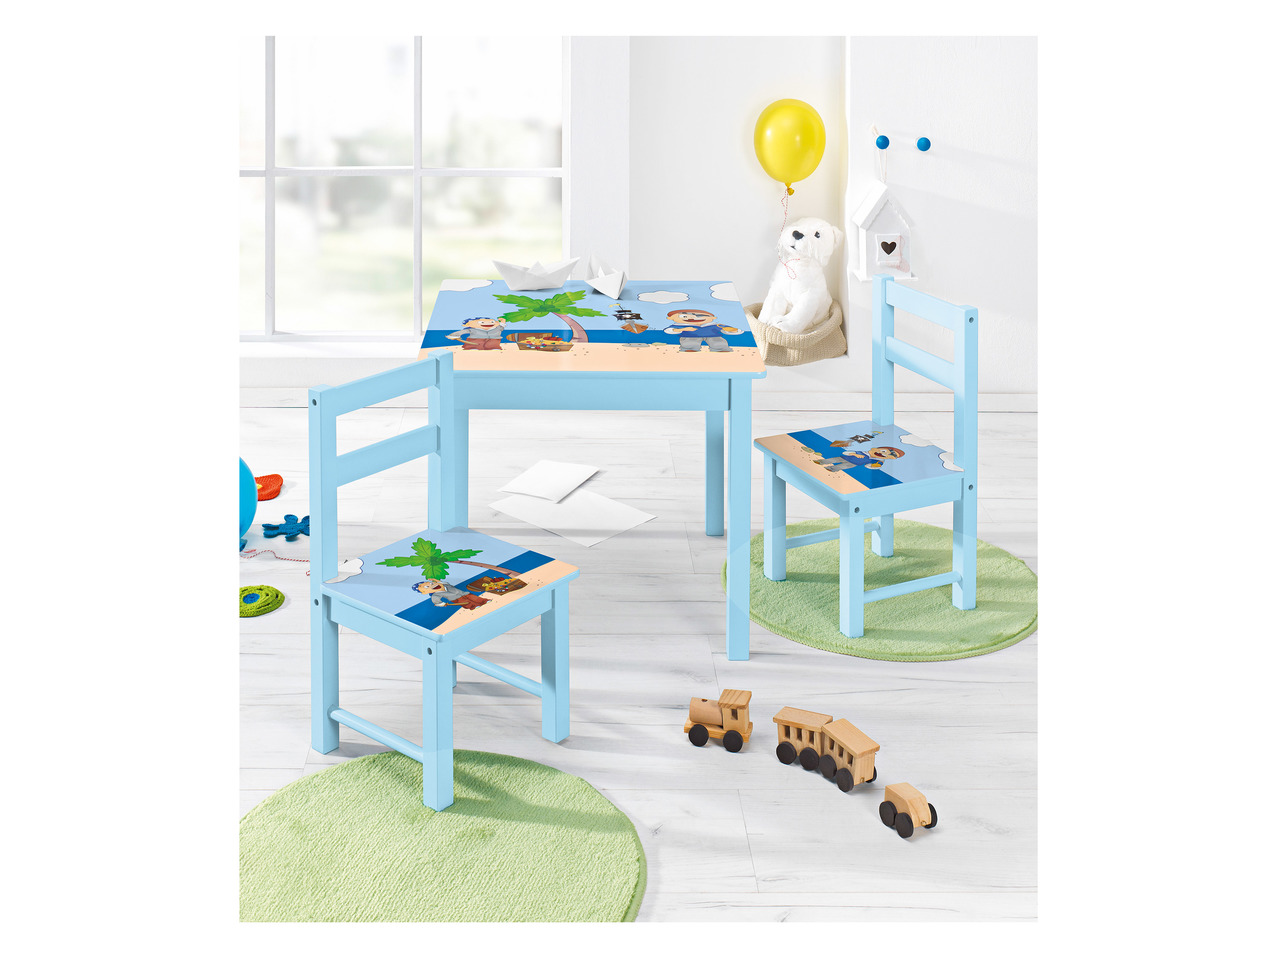 lidl childrens table and chairs